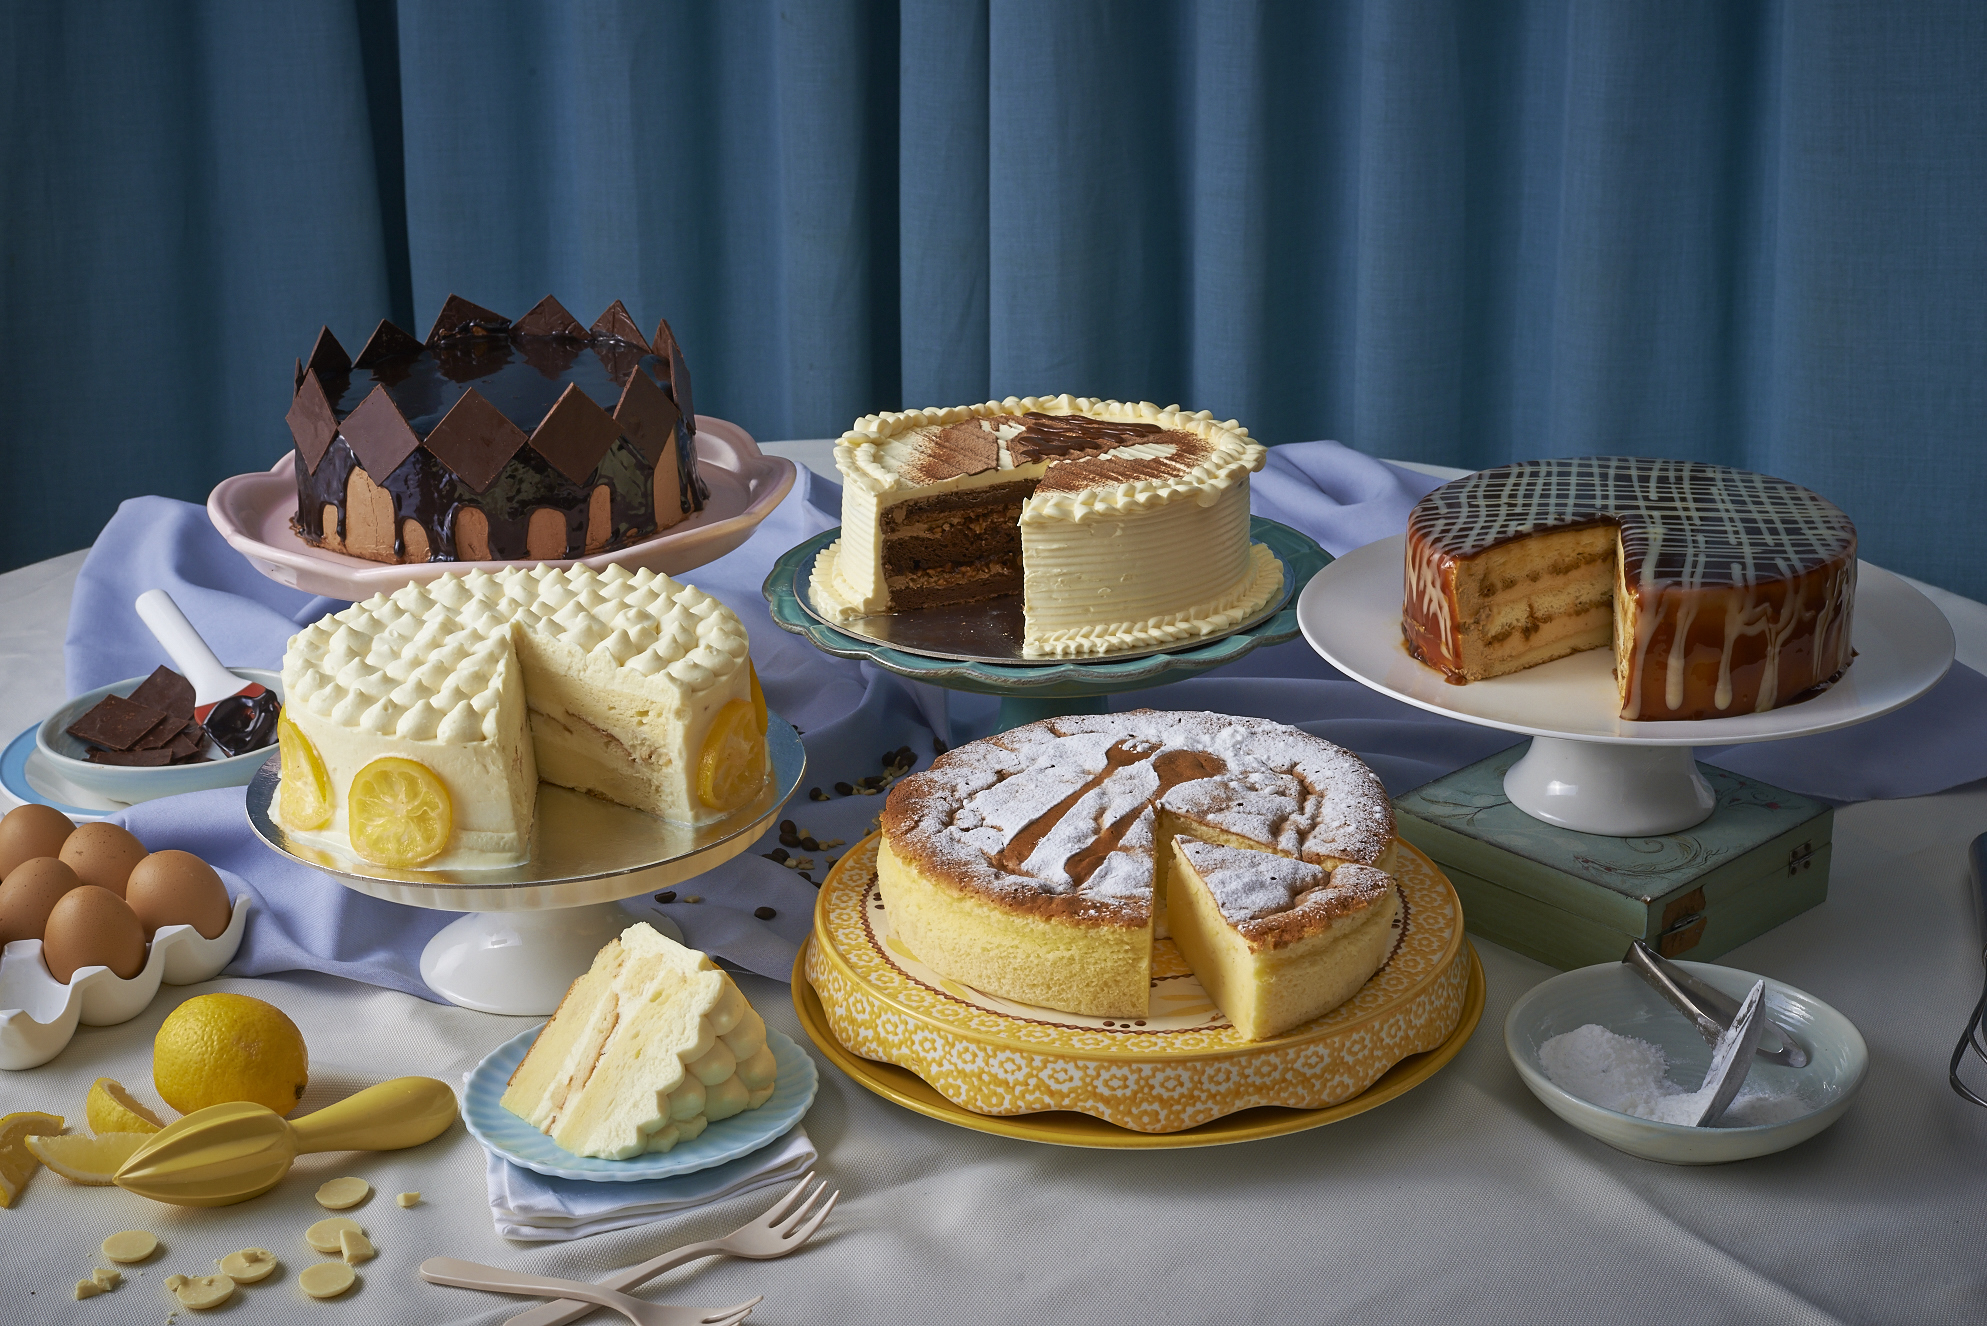 Add cheer to your holiday spread with these eye-catching cakes